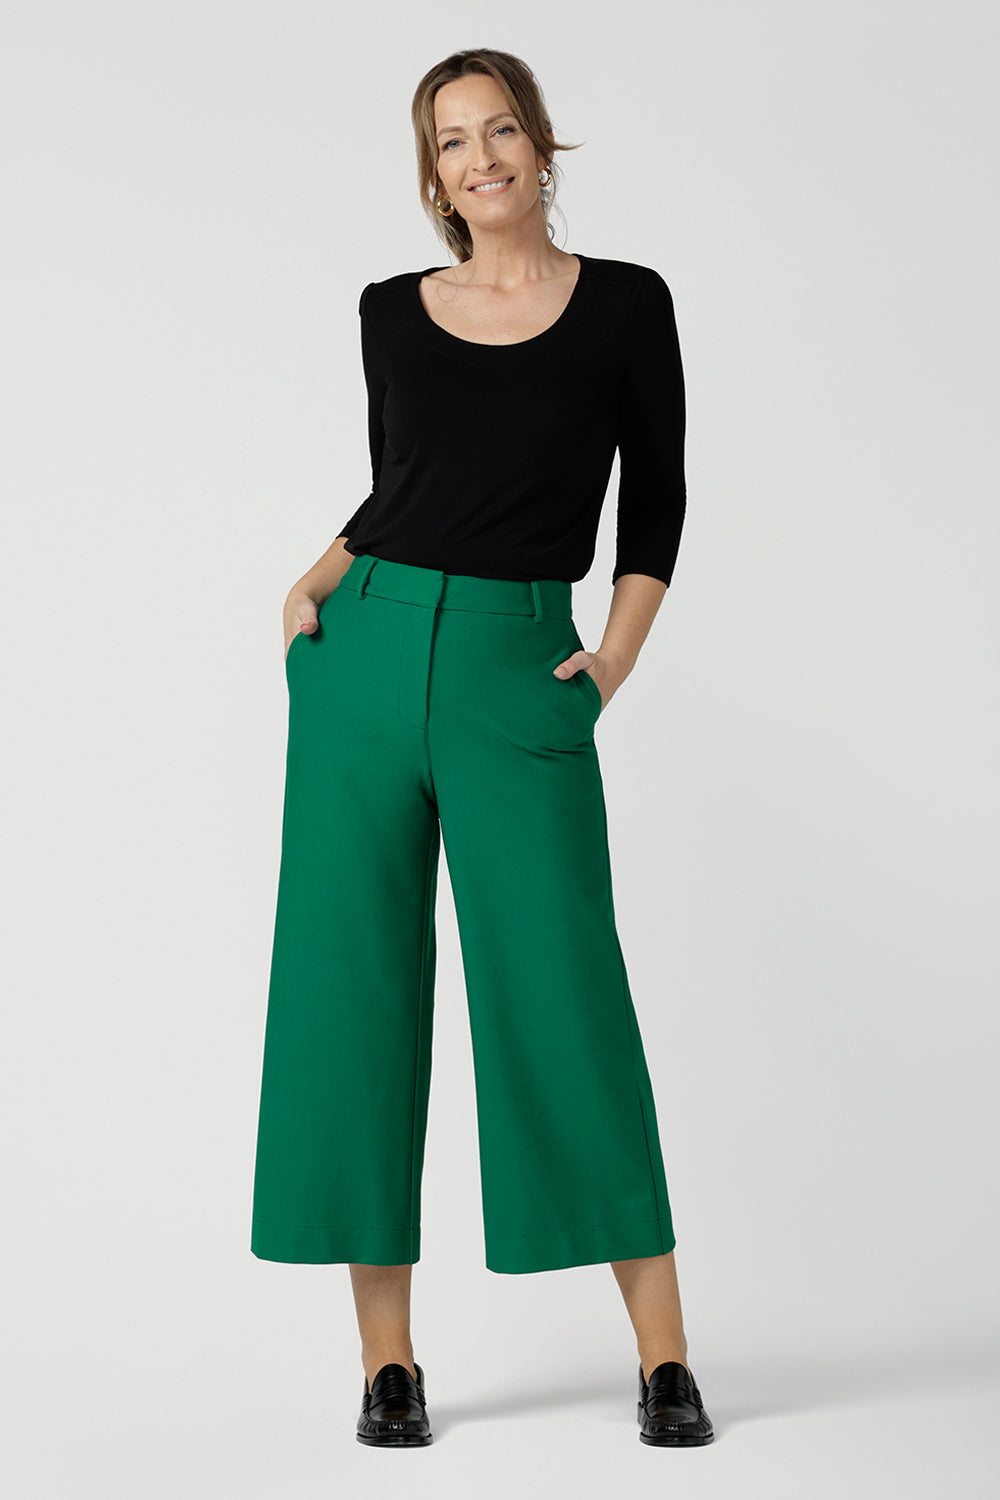 An elegant top for work and casual wear, this scoop neck, 3/4 sleeve top in black bamboo jersey is made in Australia by Australian and New Zealand women's clothing brand, Leina & Fleur. Worn with green, wide leg tailored work pants, shop this comfortable work top online in petite, mid size and plus sizes.